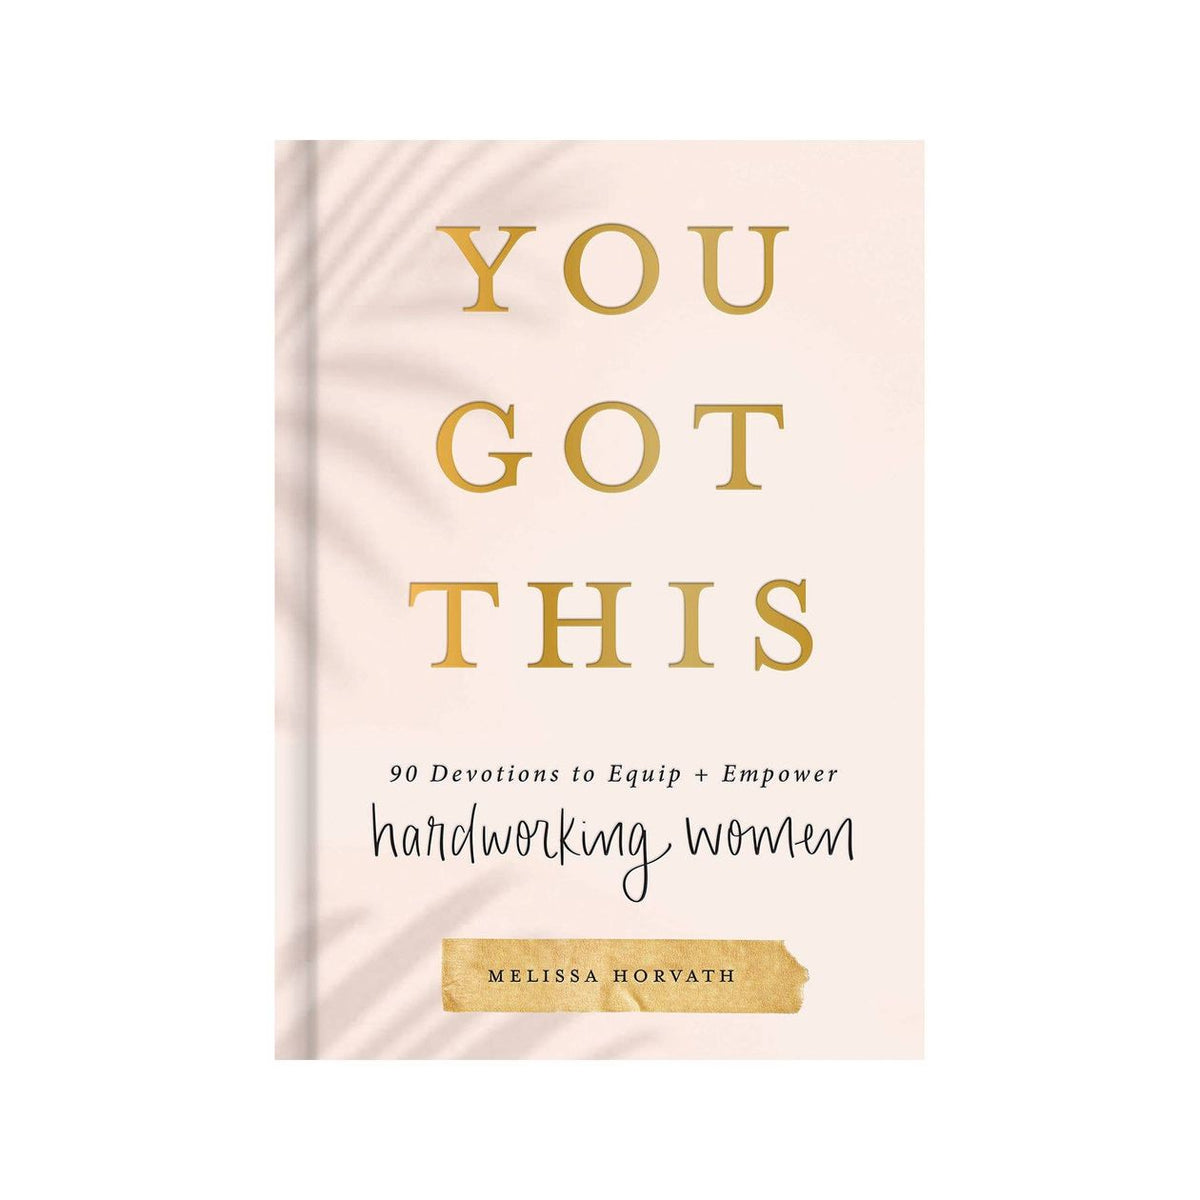 You Got This: 90 Devotions to Empower Hardworking Women Book